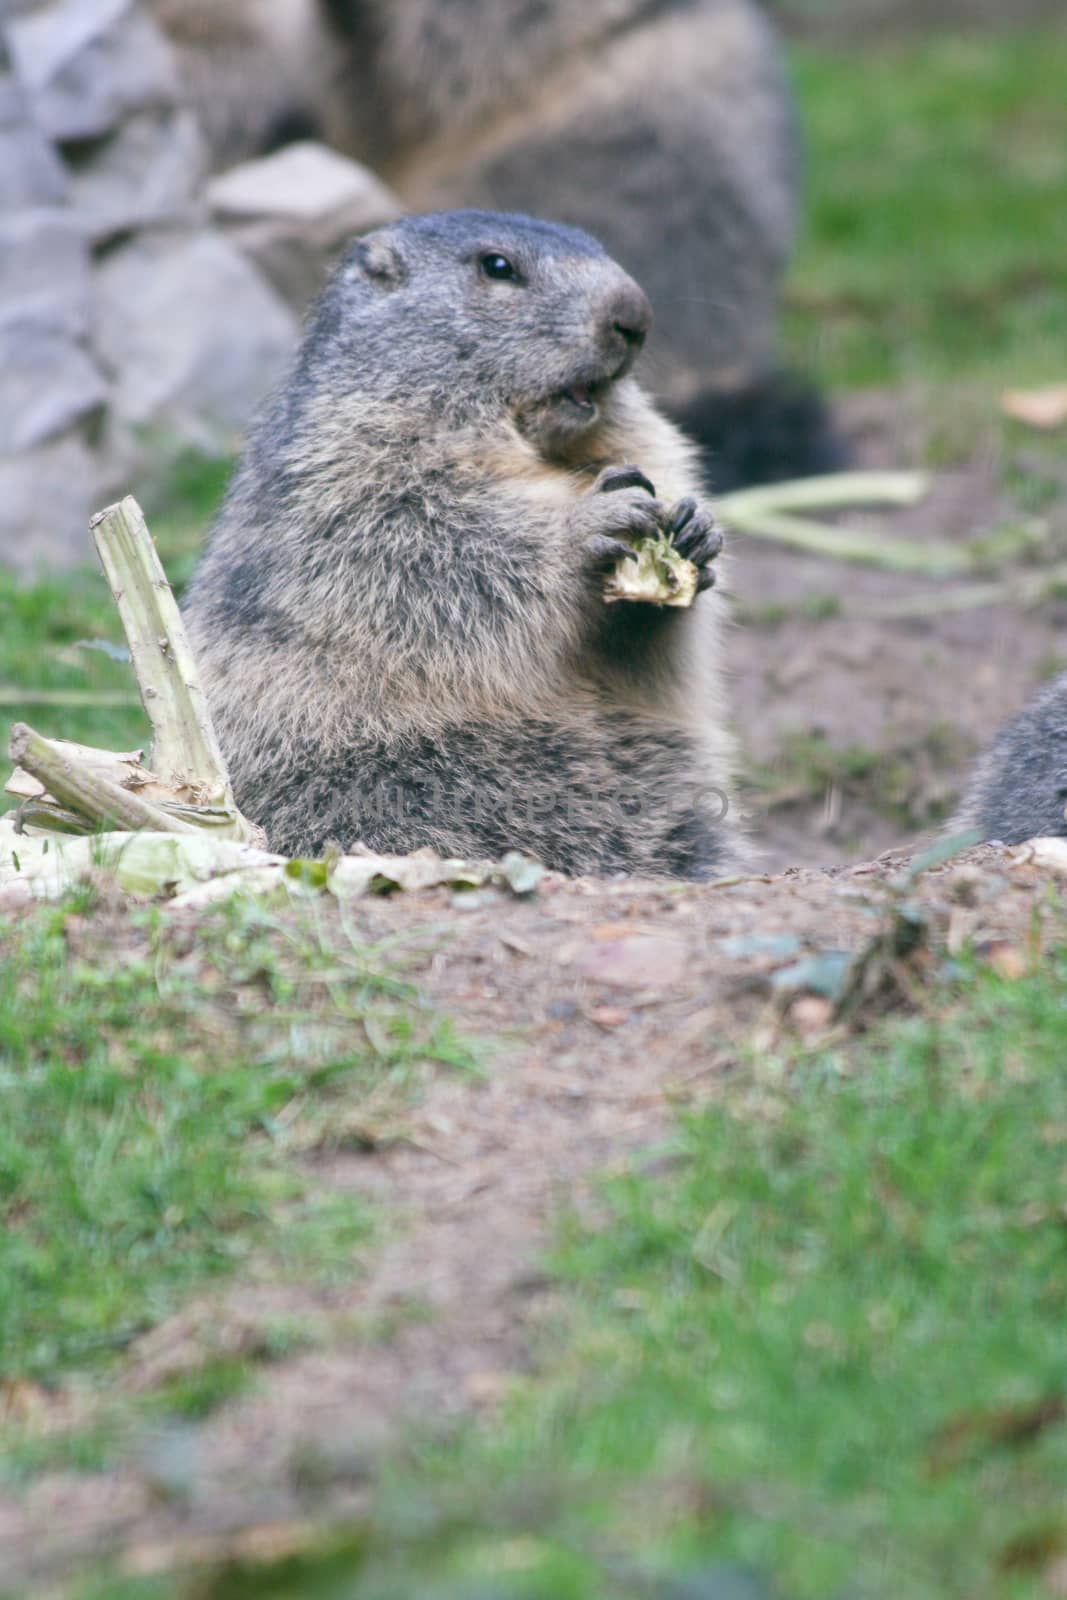 The groundhog (Marmota), a rodent living in the Alps